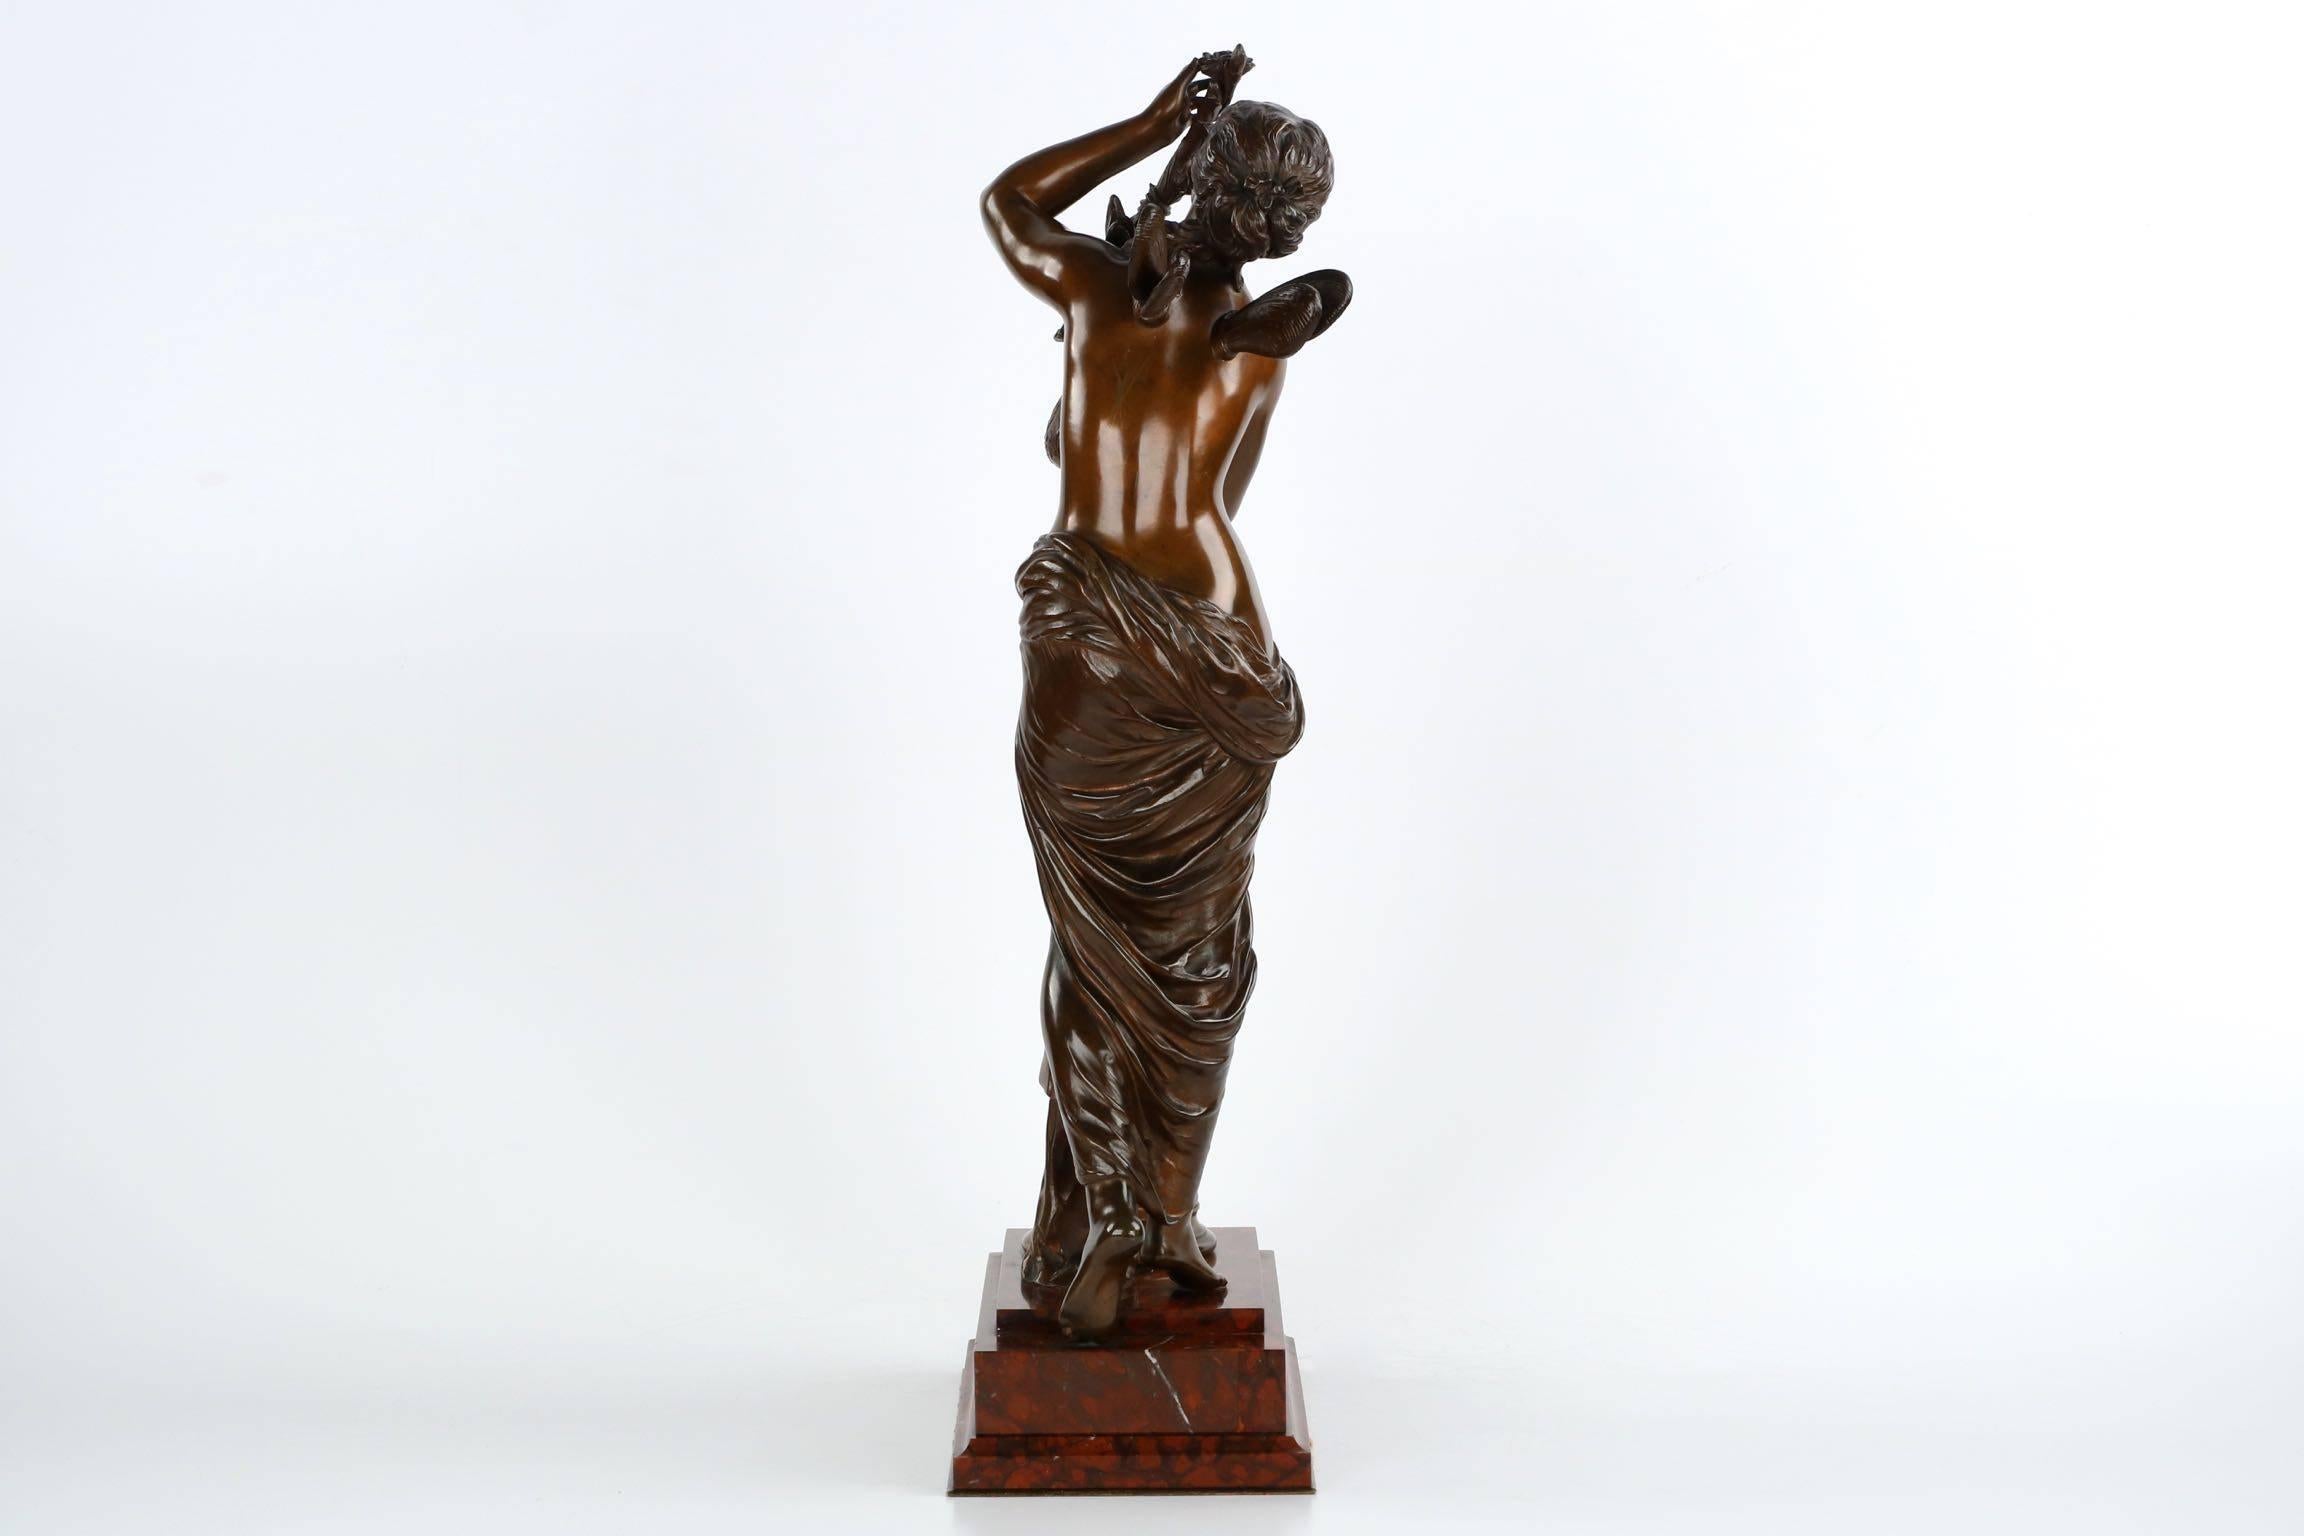 An exquisite sculpture depicting “The Dawn” or “L’Aurore” by Mathurin Moreau, this moving work captures a timeless scene of a young nymph stepping up the stairs of this original rouge grotto marble base to greet the abundant flowers growing from a